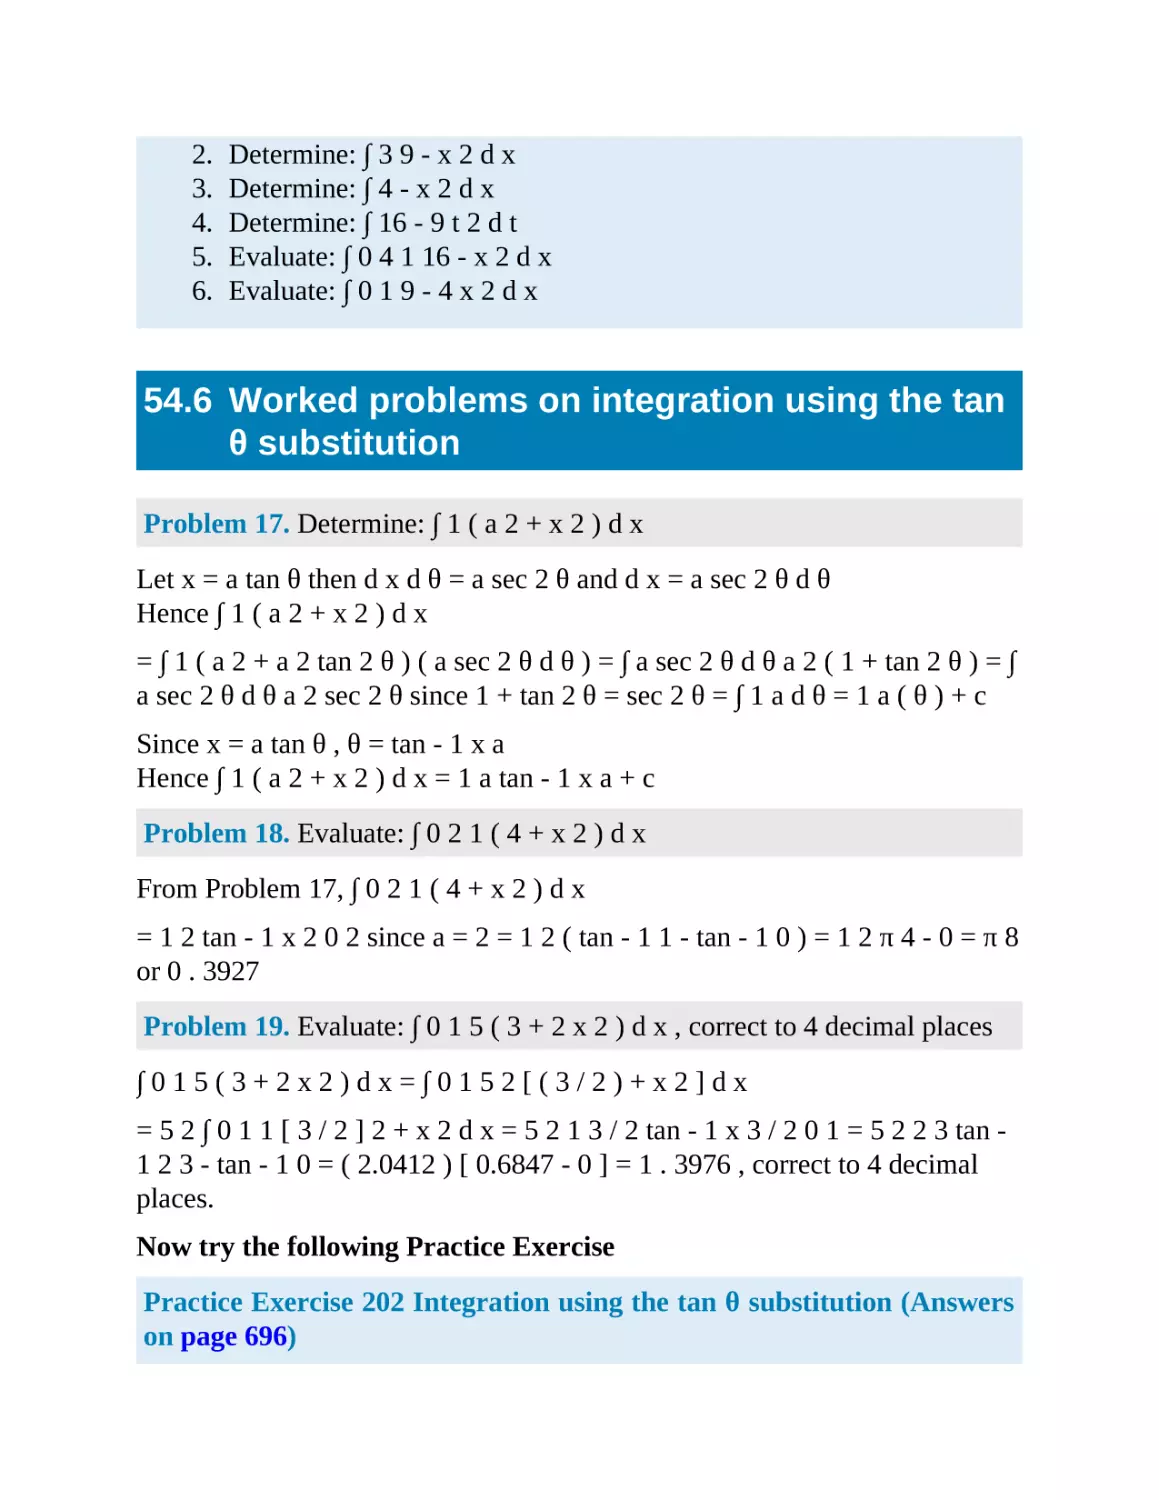 54.6 Worked problems on integration using the substitution